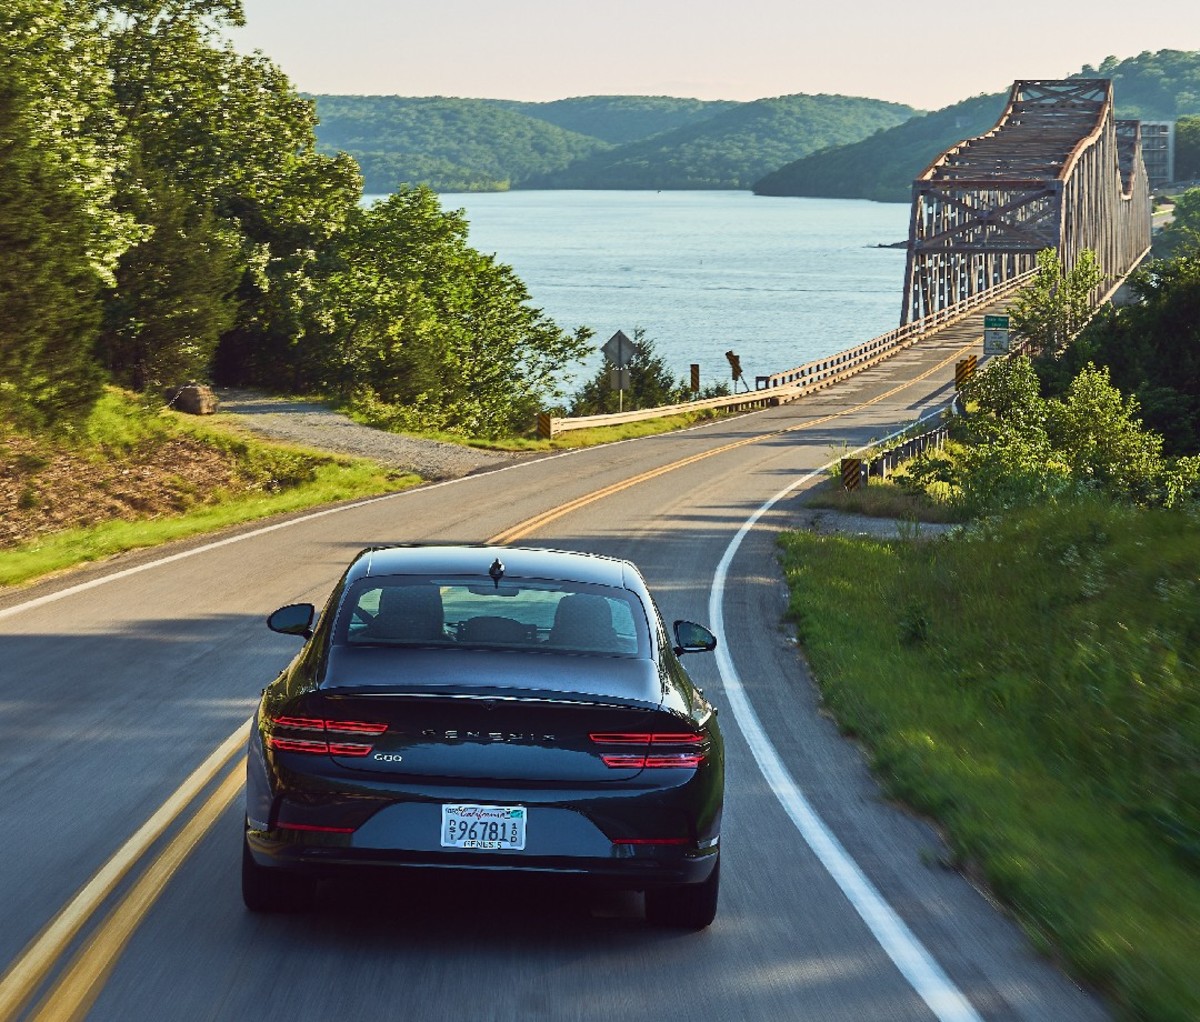 The Genesis Electrified G80 driving on the road, rear angle